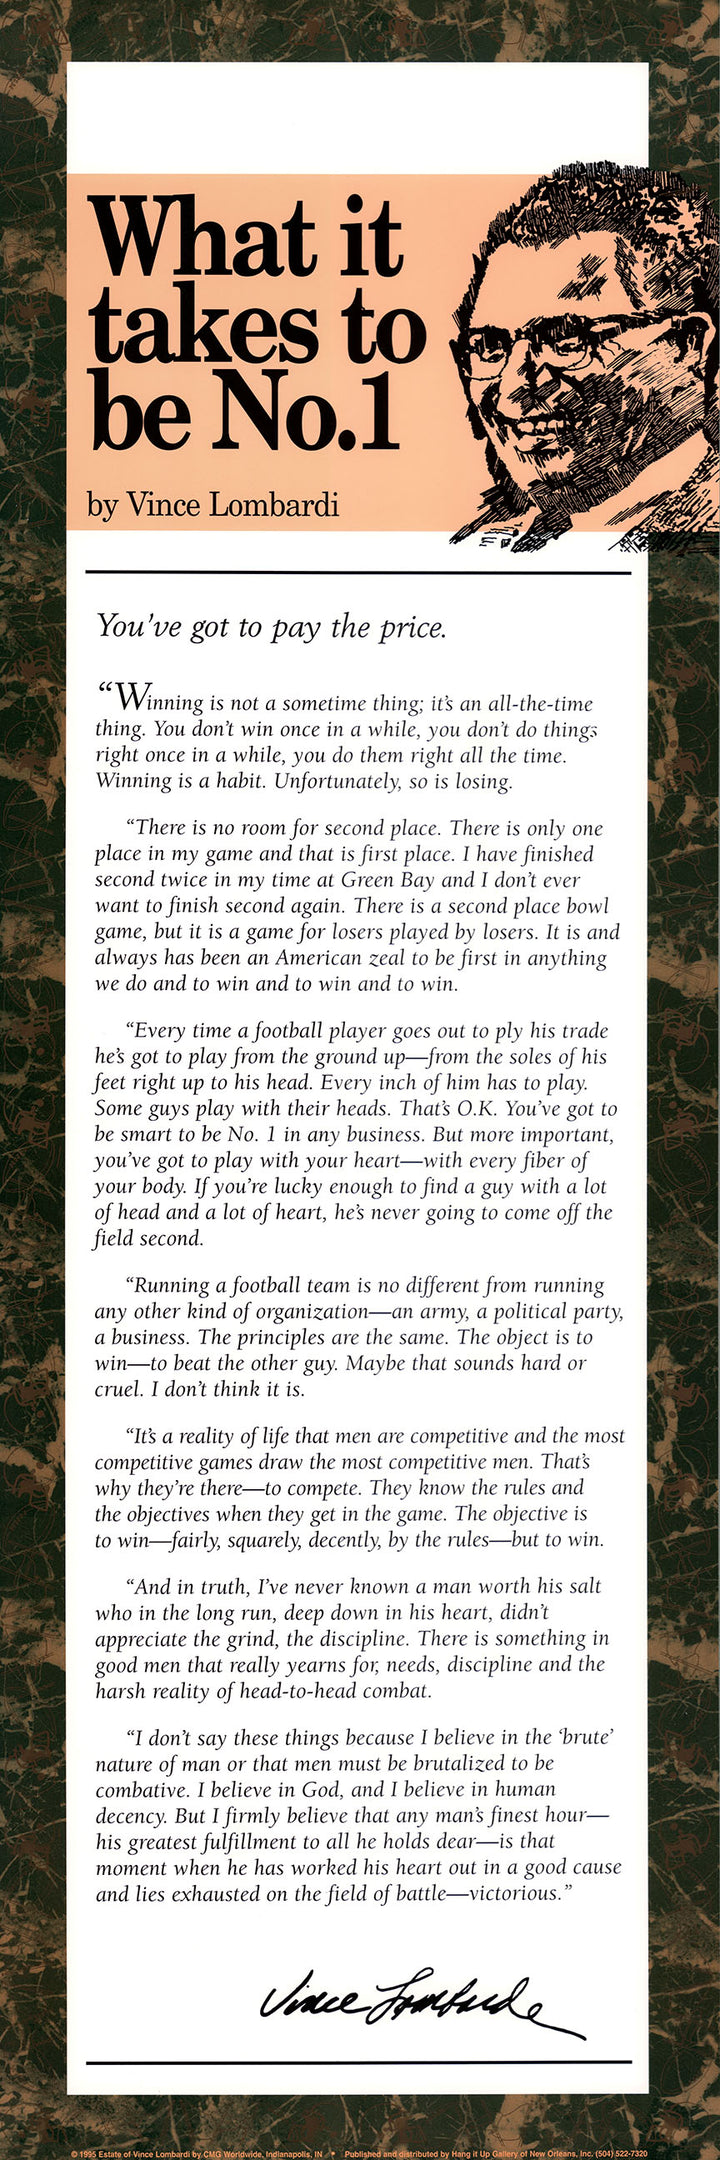 What It Takes to Be No. 1 by Vince Lombardi - 12 X 36 Inches (Art Print)